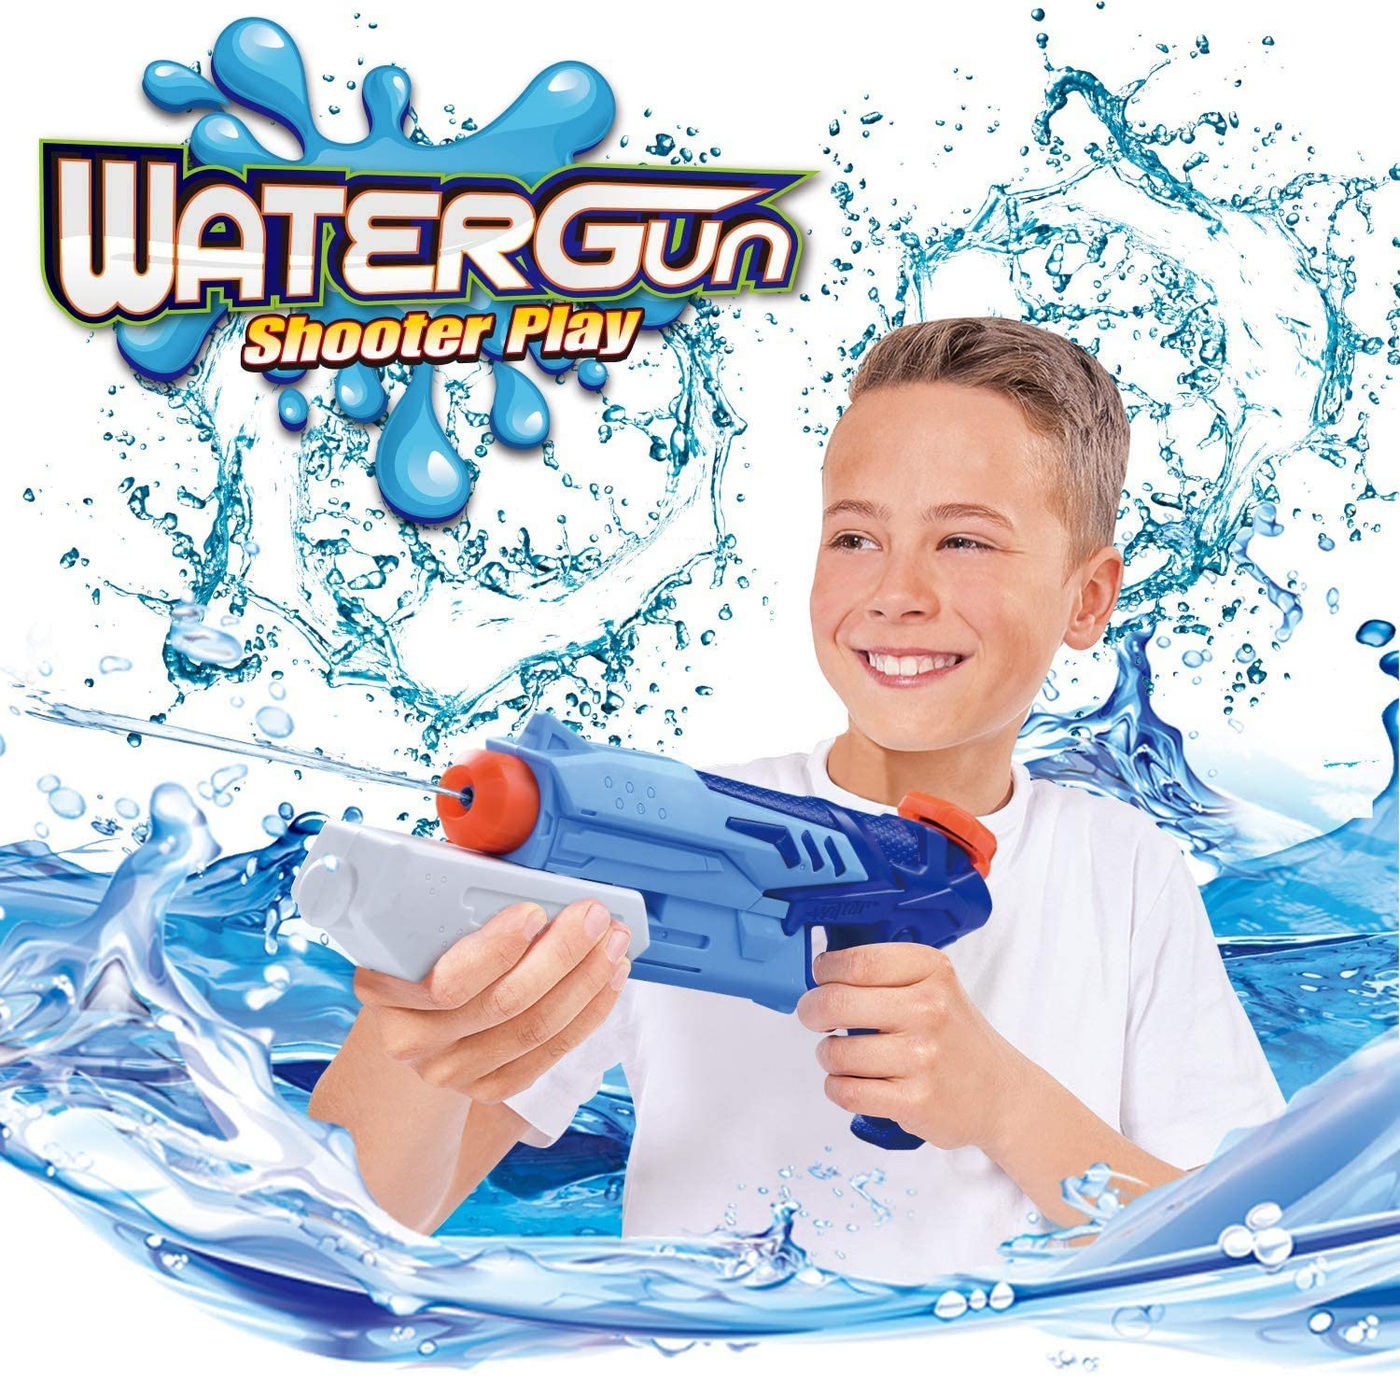 HITOP Water Guns for Kids Squirt Water Blaster Guns Toy Summer Swimming Pool Beach Sand Outdoor Water Fighting Play Toys Gifts for Boys Girls Children (3 Pack)